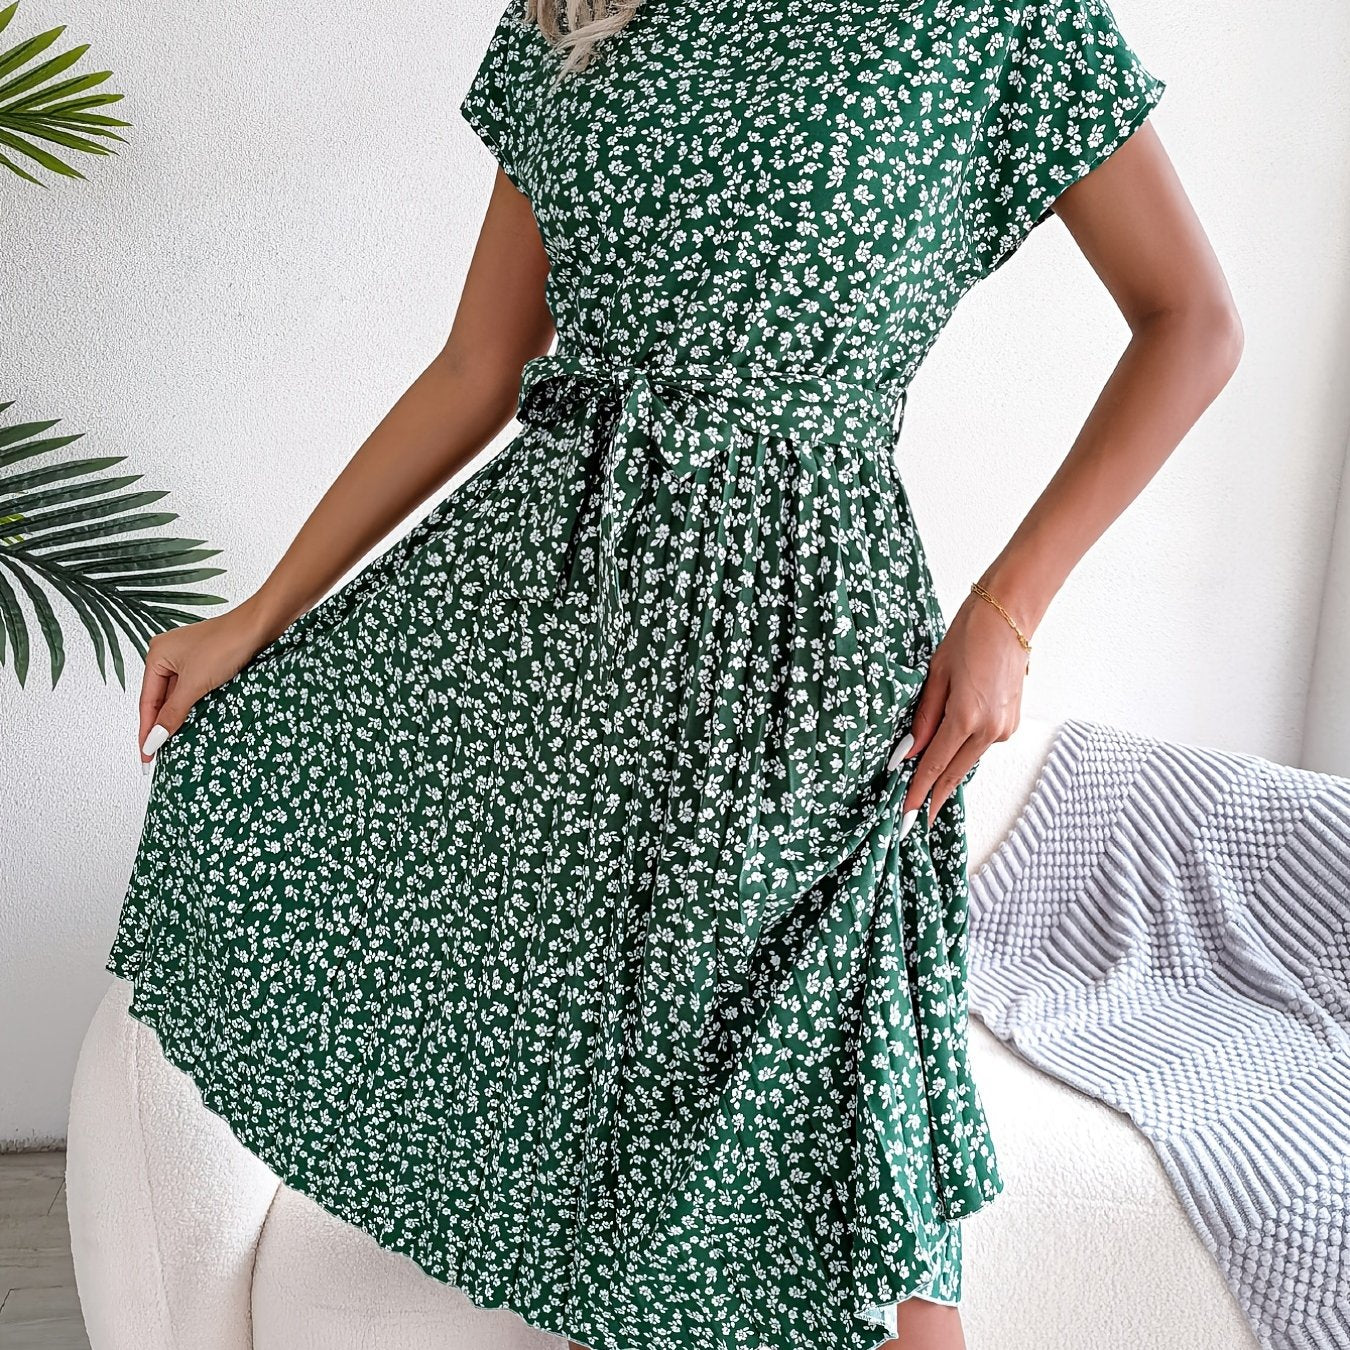 「lovevop」Stylish Floral Print Belted Dress, Crew Neck Short Sleeve Dress, Casual Every Day Dress, Women's Clothing